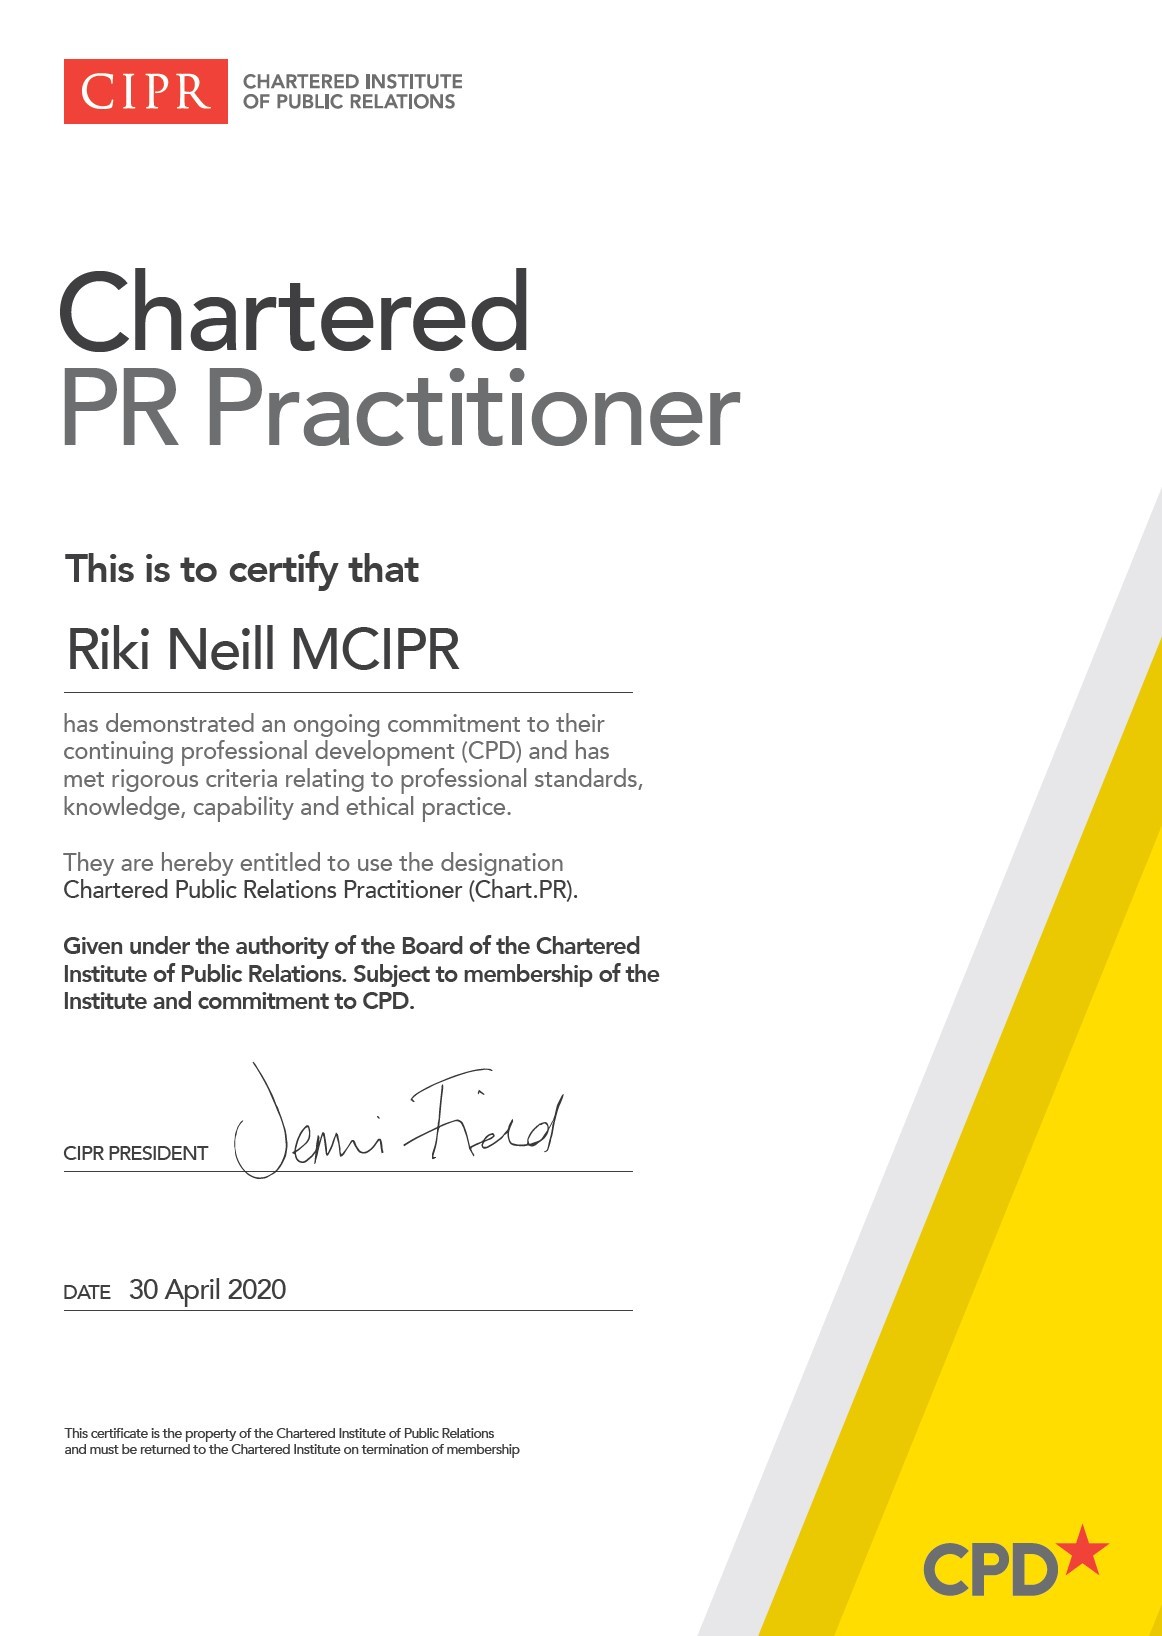 CIPR Chartered